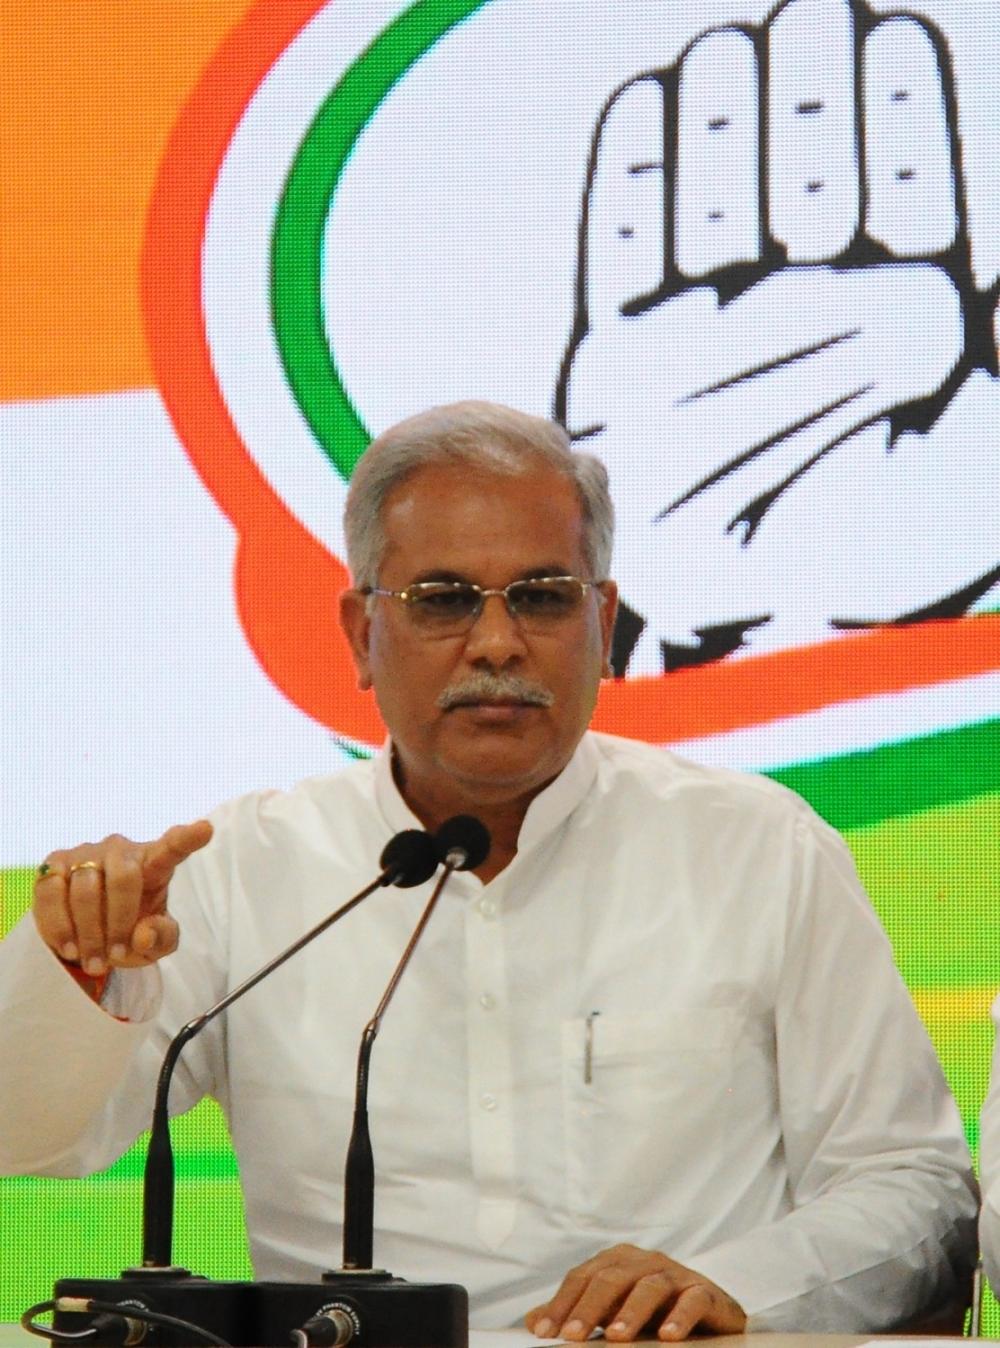 The Weekend Leader - Speculation of change in Chhattisgarh has ended: Bhupesh Baghel